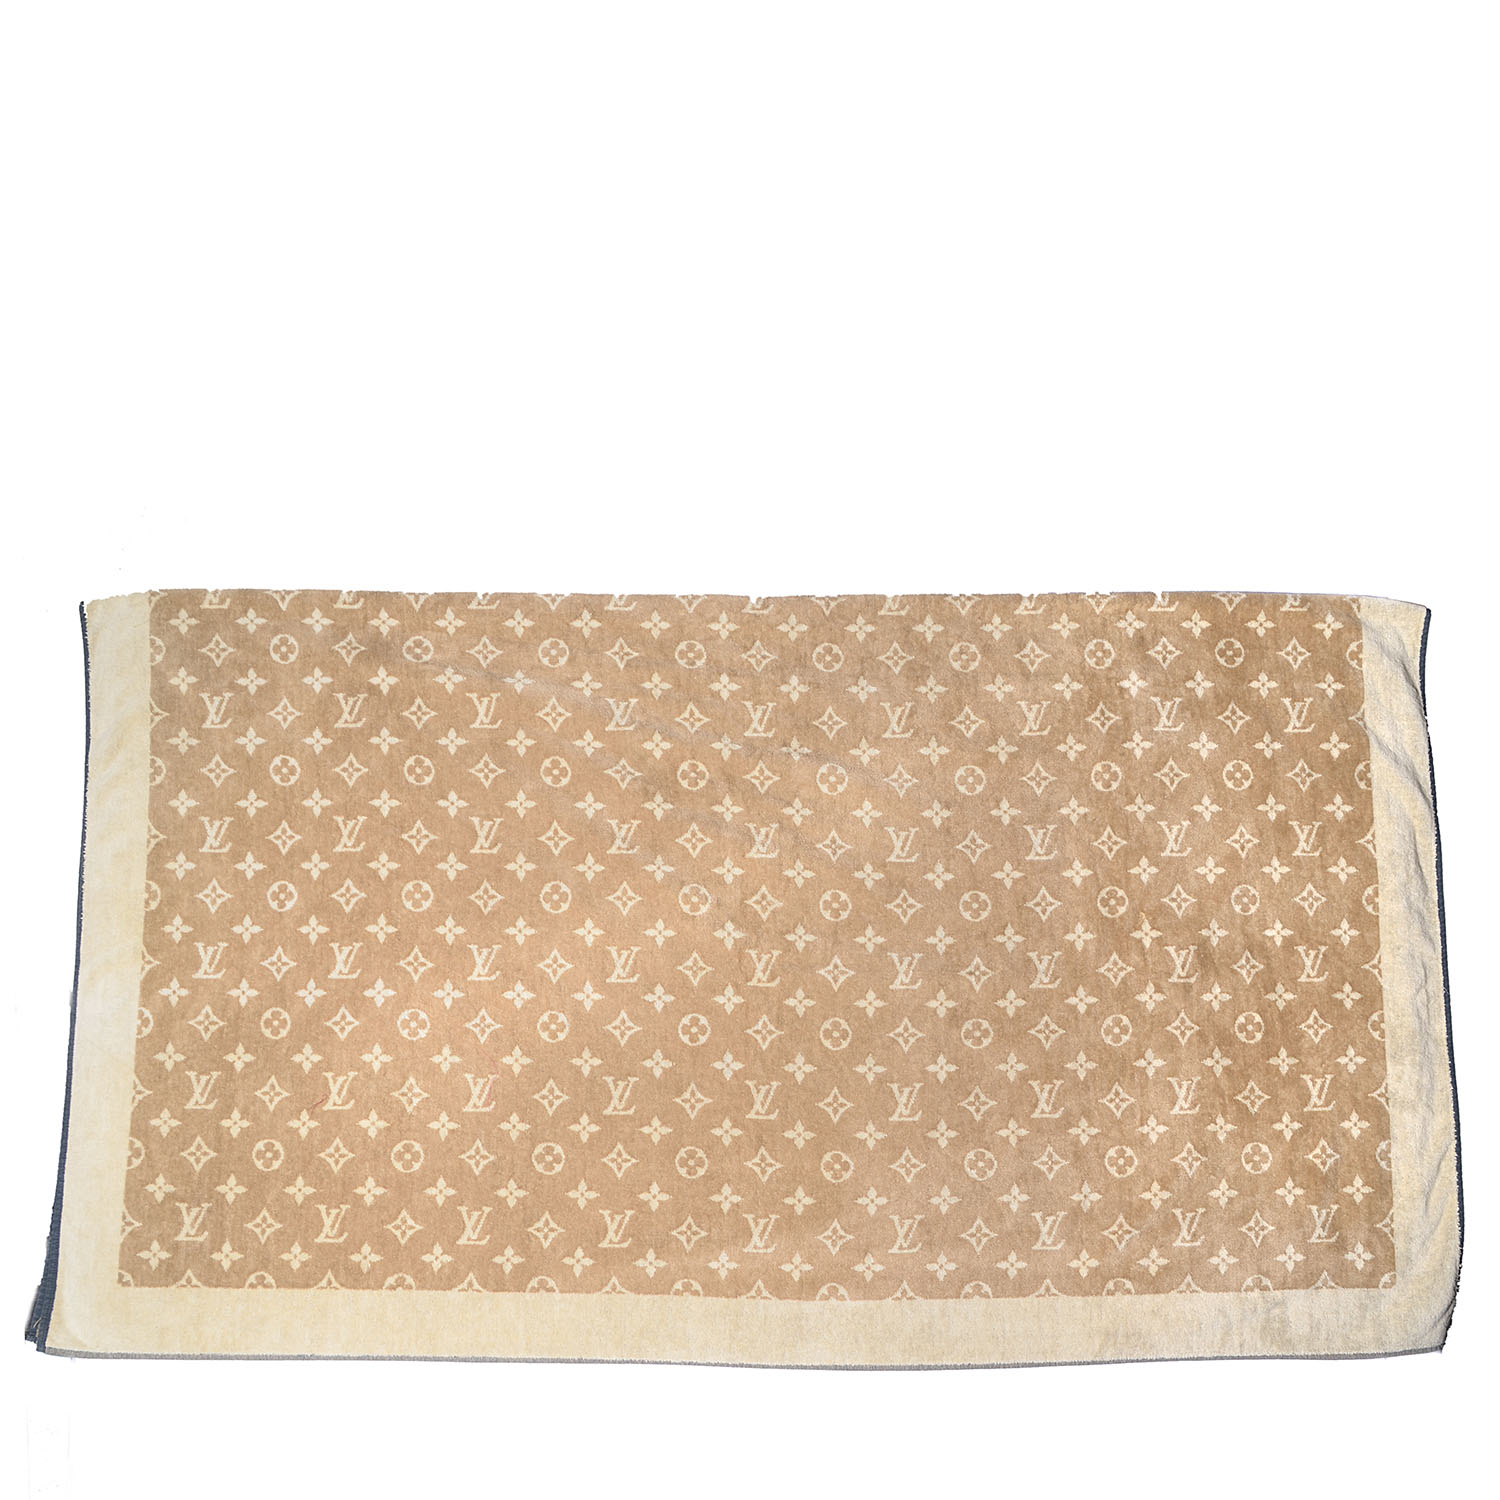 LOUIS VUITTON brown cotton CLASSIC BEACH Towel For Sale at 1stDibs